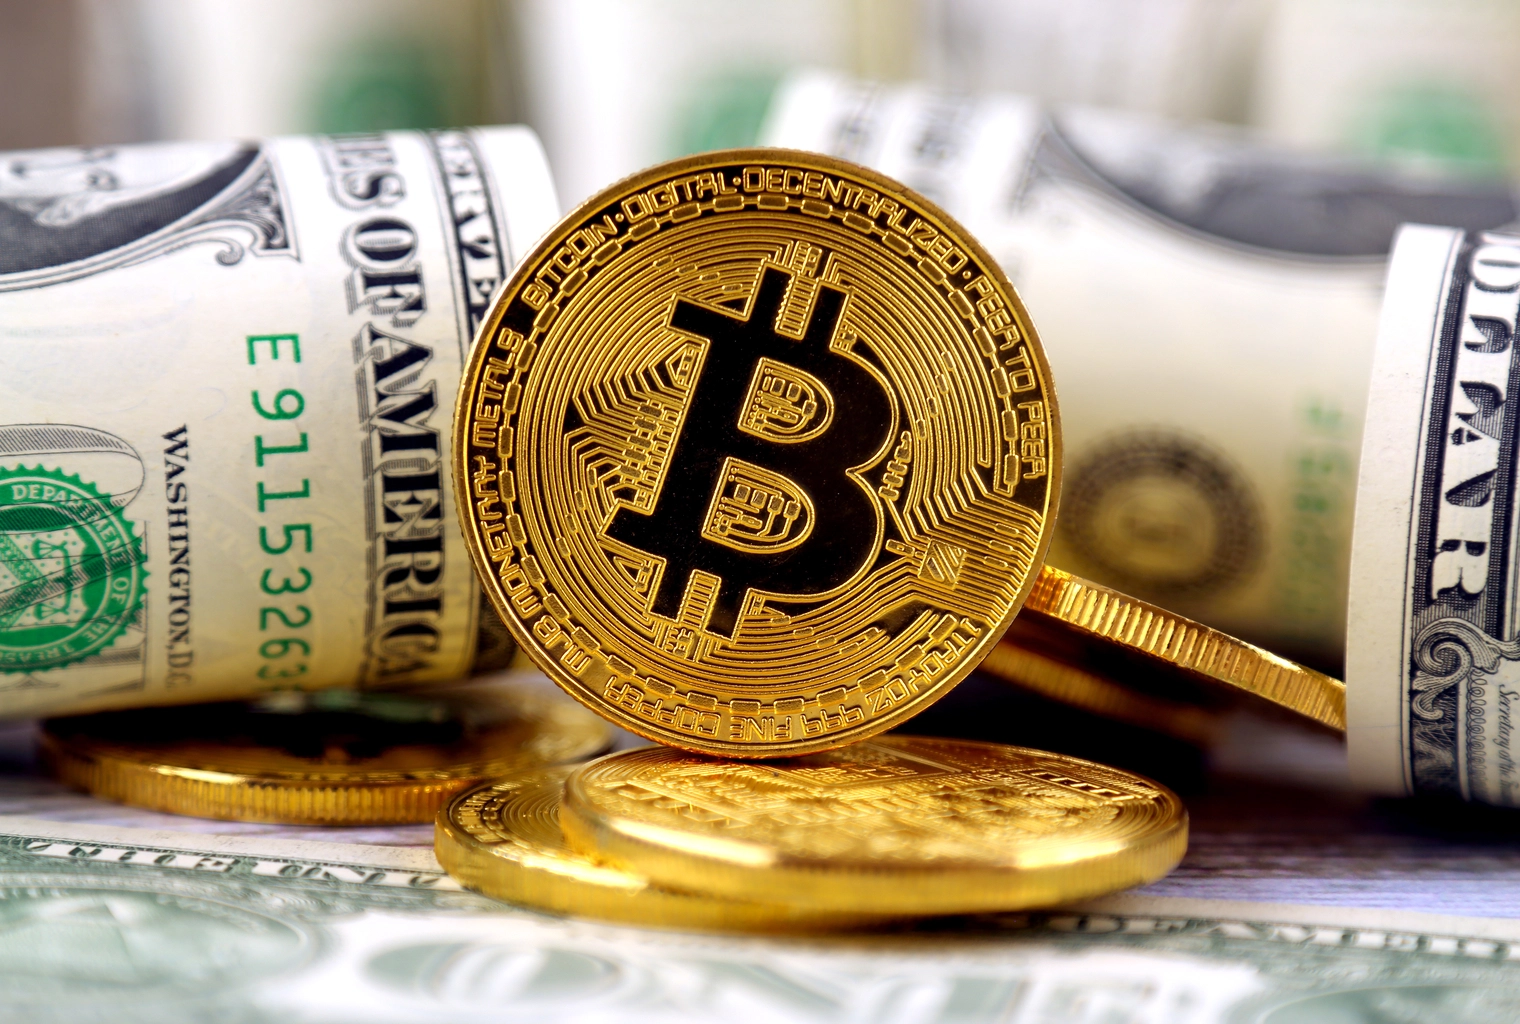 Will Other Nations Accept Bitcoin as Currency?